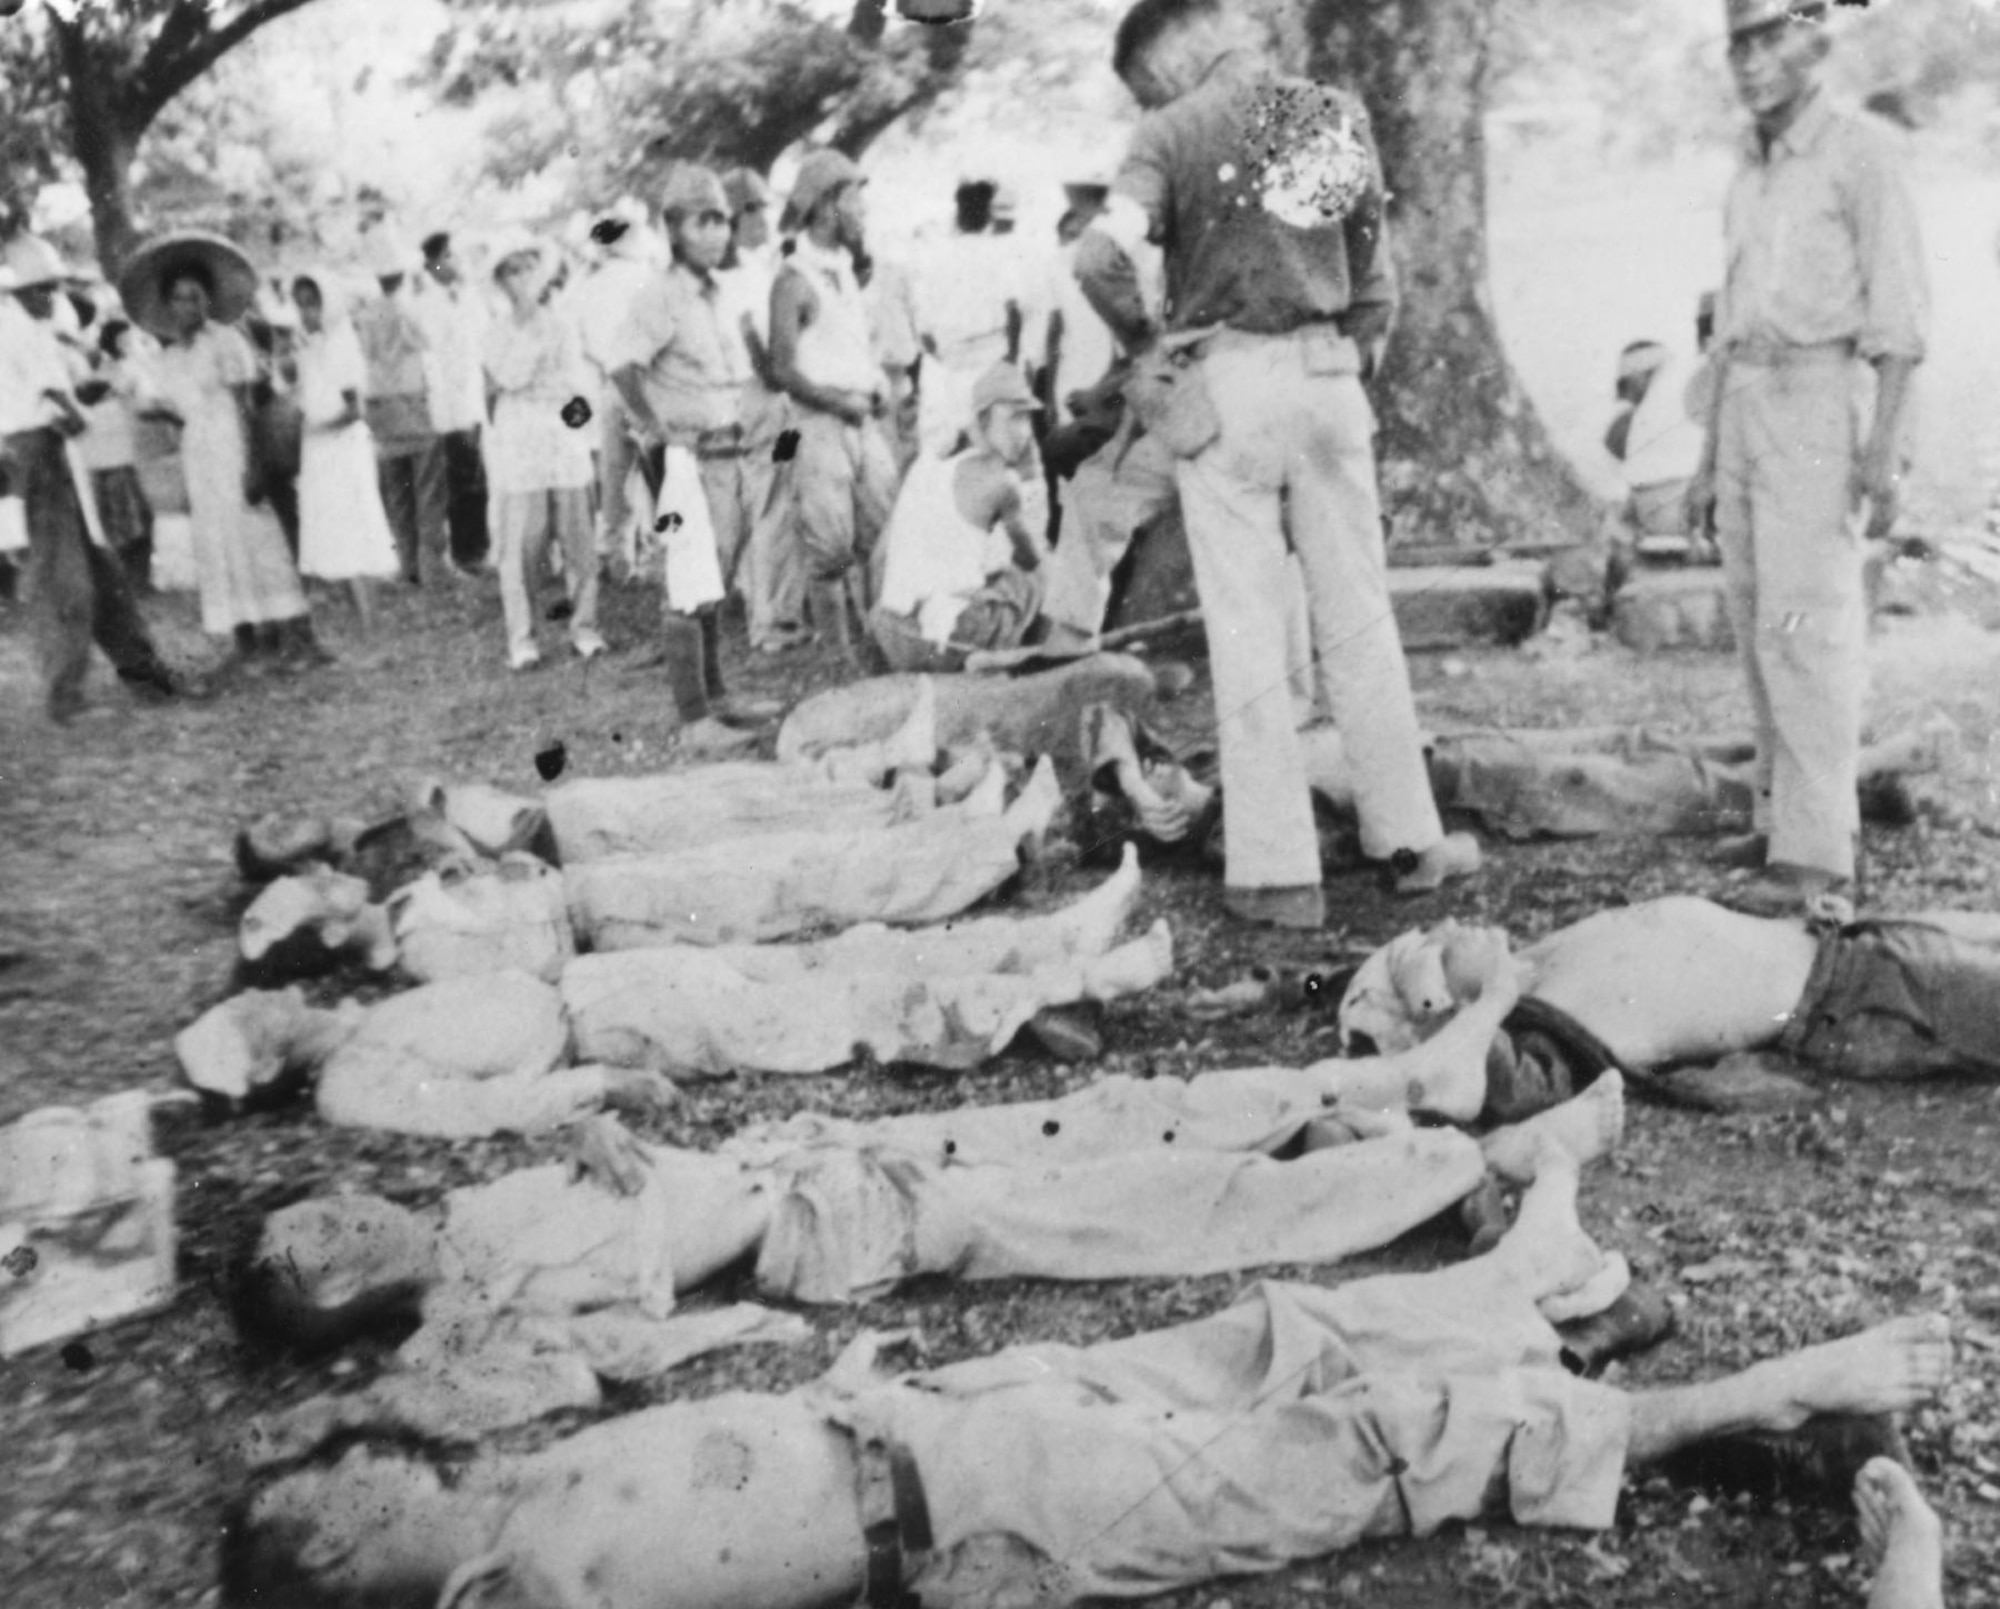 To emphasize their complete victory, Japanese guards forced horrified Filipino citizens to view murdered POWs. (U.S. Air Force photo)